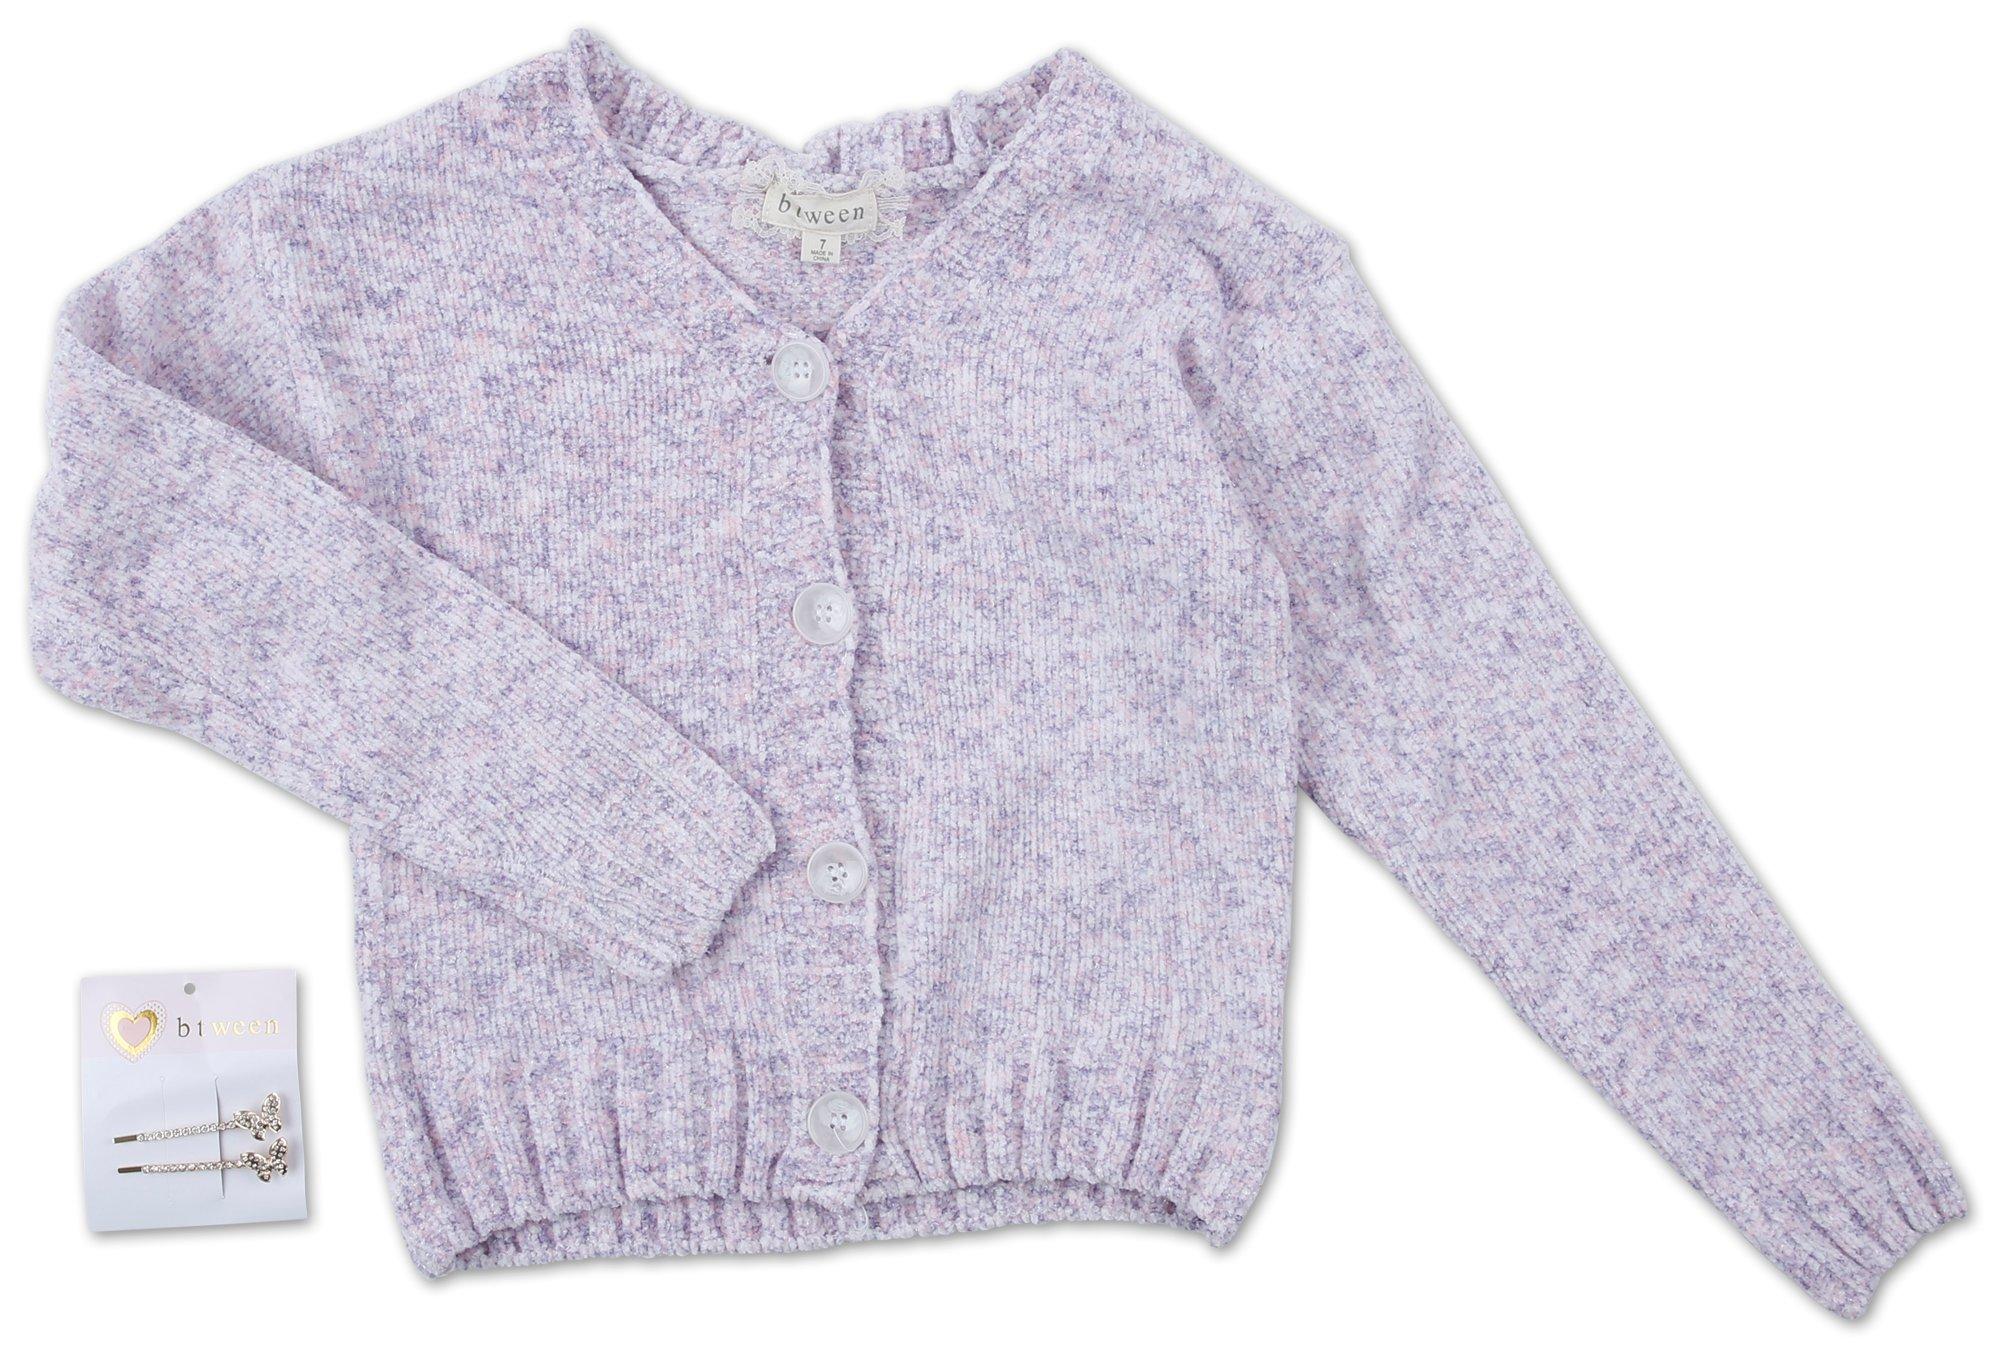 Girls Chenille Ribbed Sweater